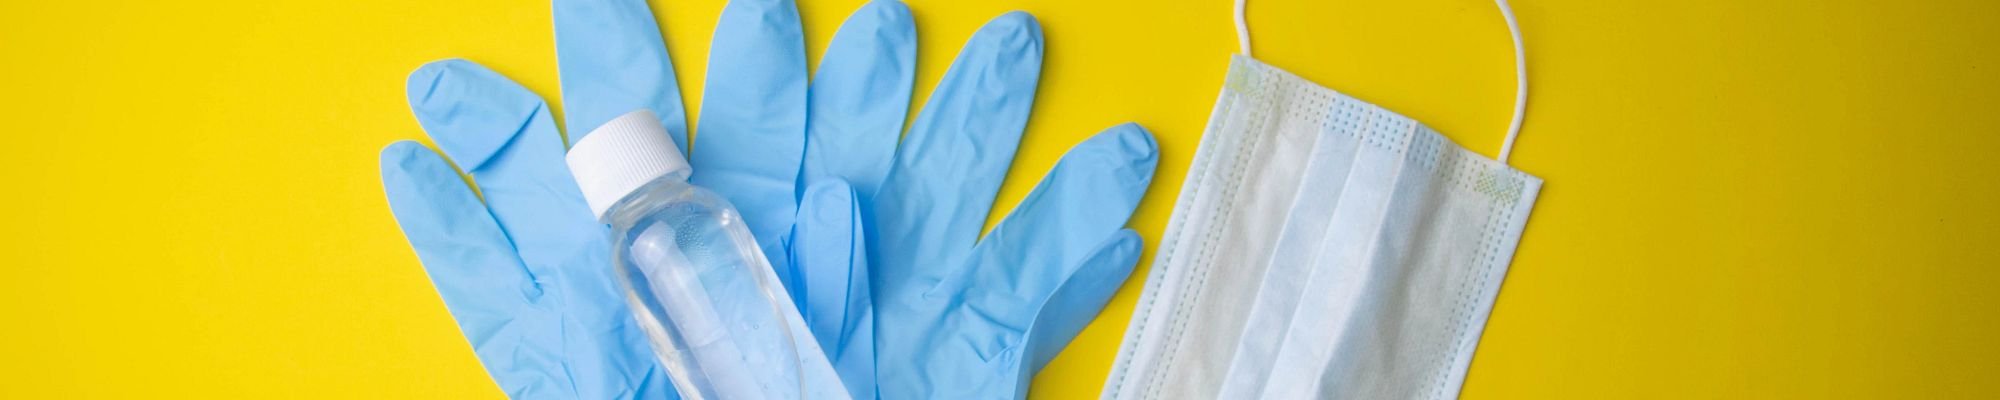 Blue Surgical gloves with hand sanitizer on them and a face mask - Carpet Innovations in Denver, CO